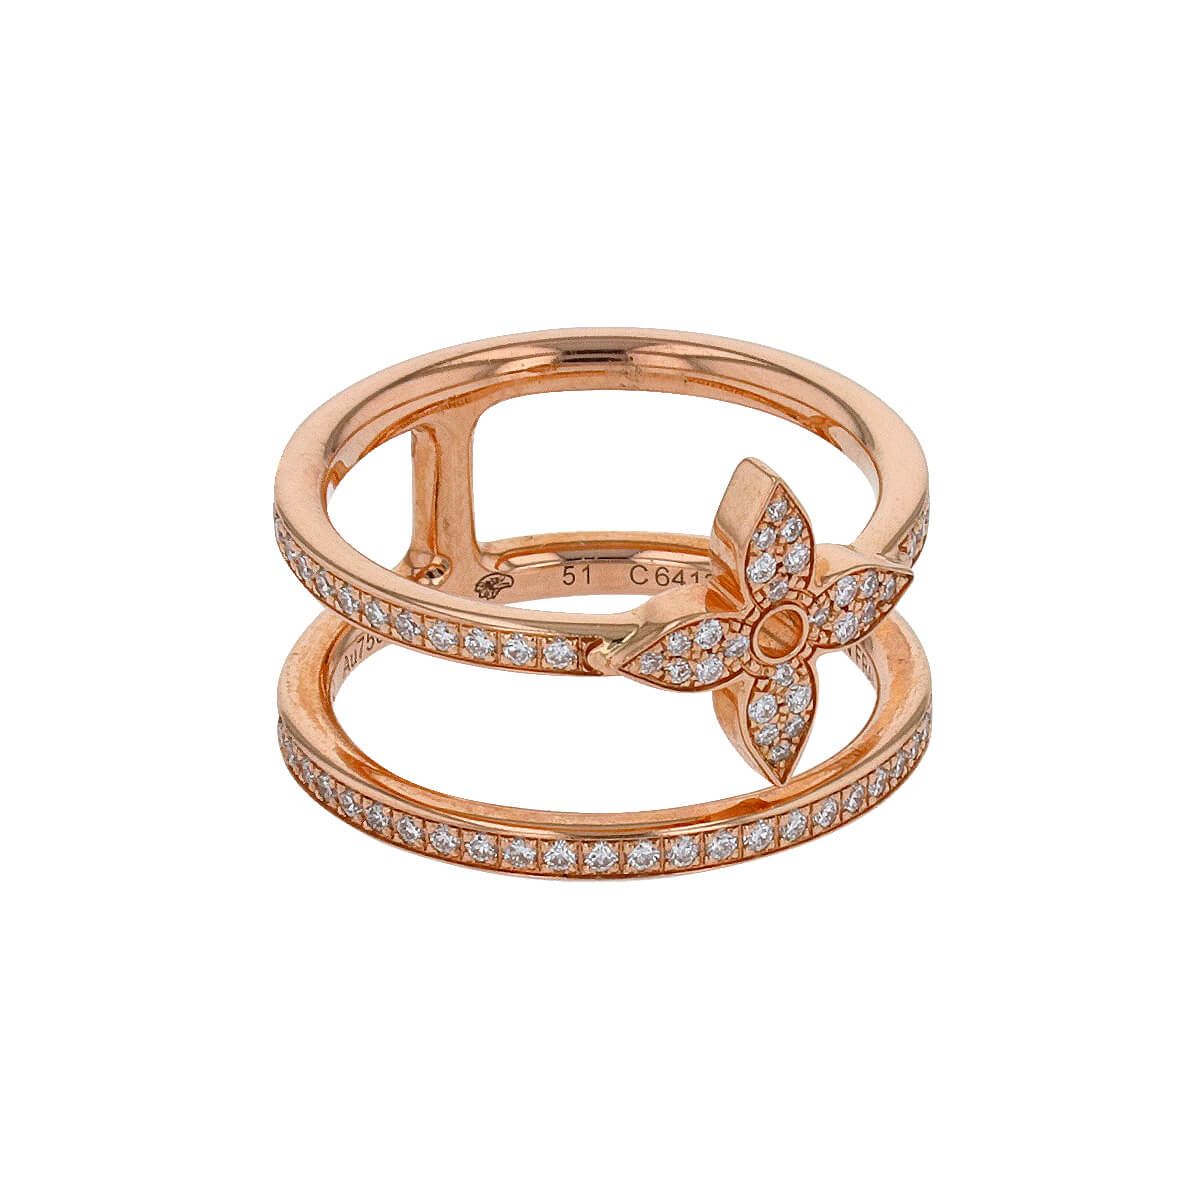 Products by Louis Vuitton: Idylle Blossom Two-Row Bracelet, Pink Gold And  Diamonds